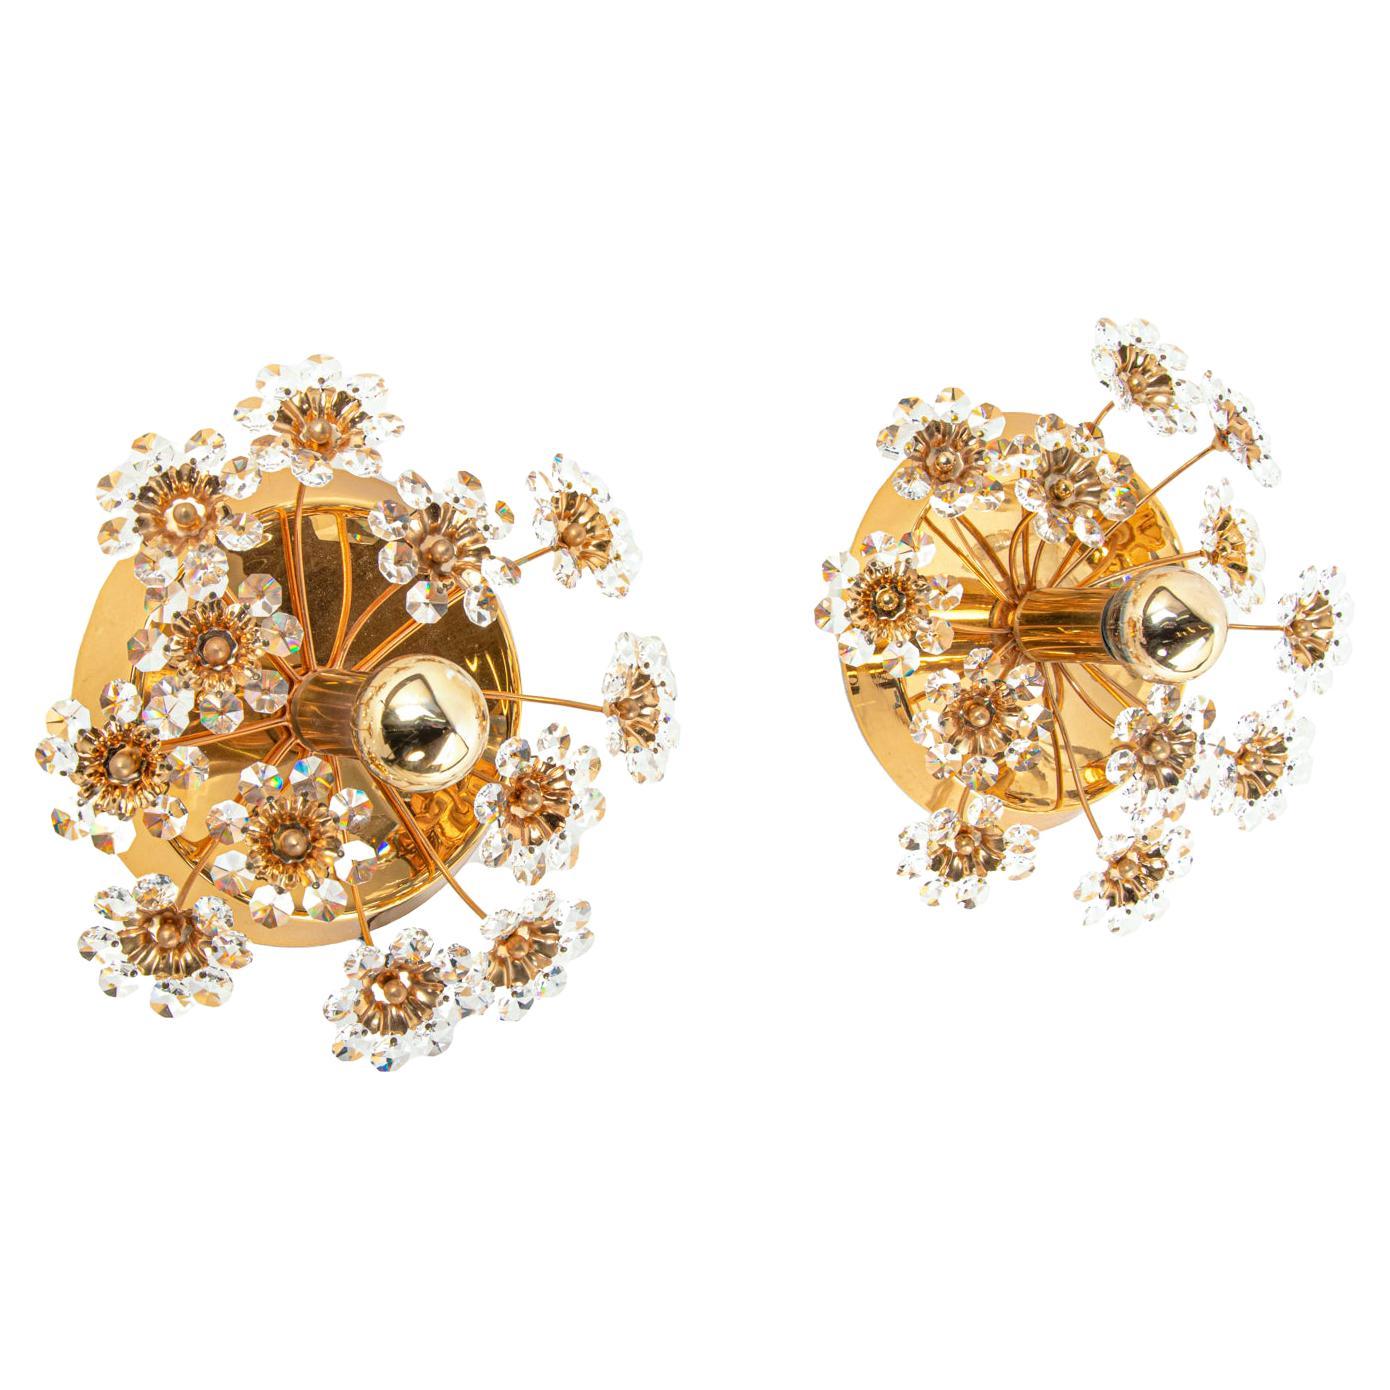 Pair of Gold-Plated Brass and Crystal Glass Wall Lamps Sconces by Palwa, 1960 For Sale